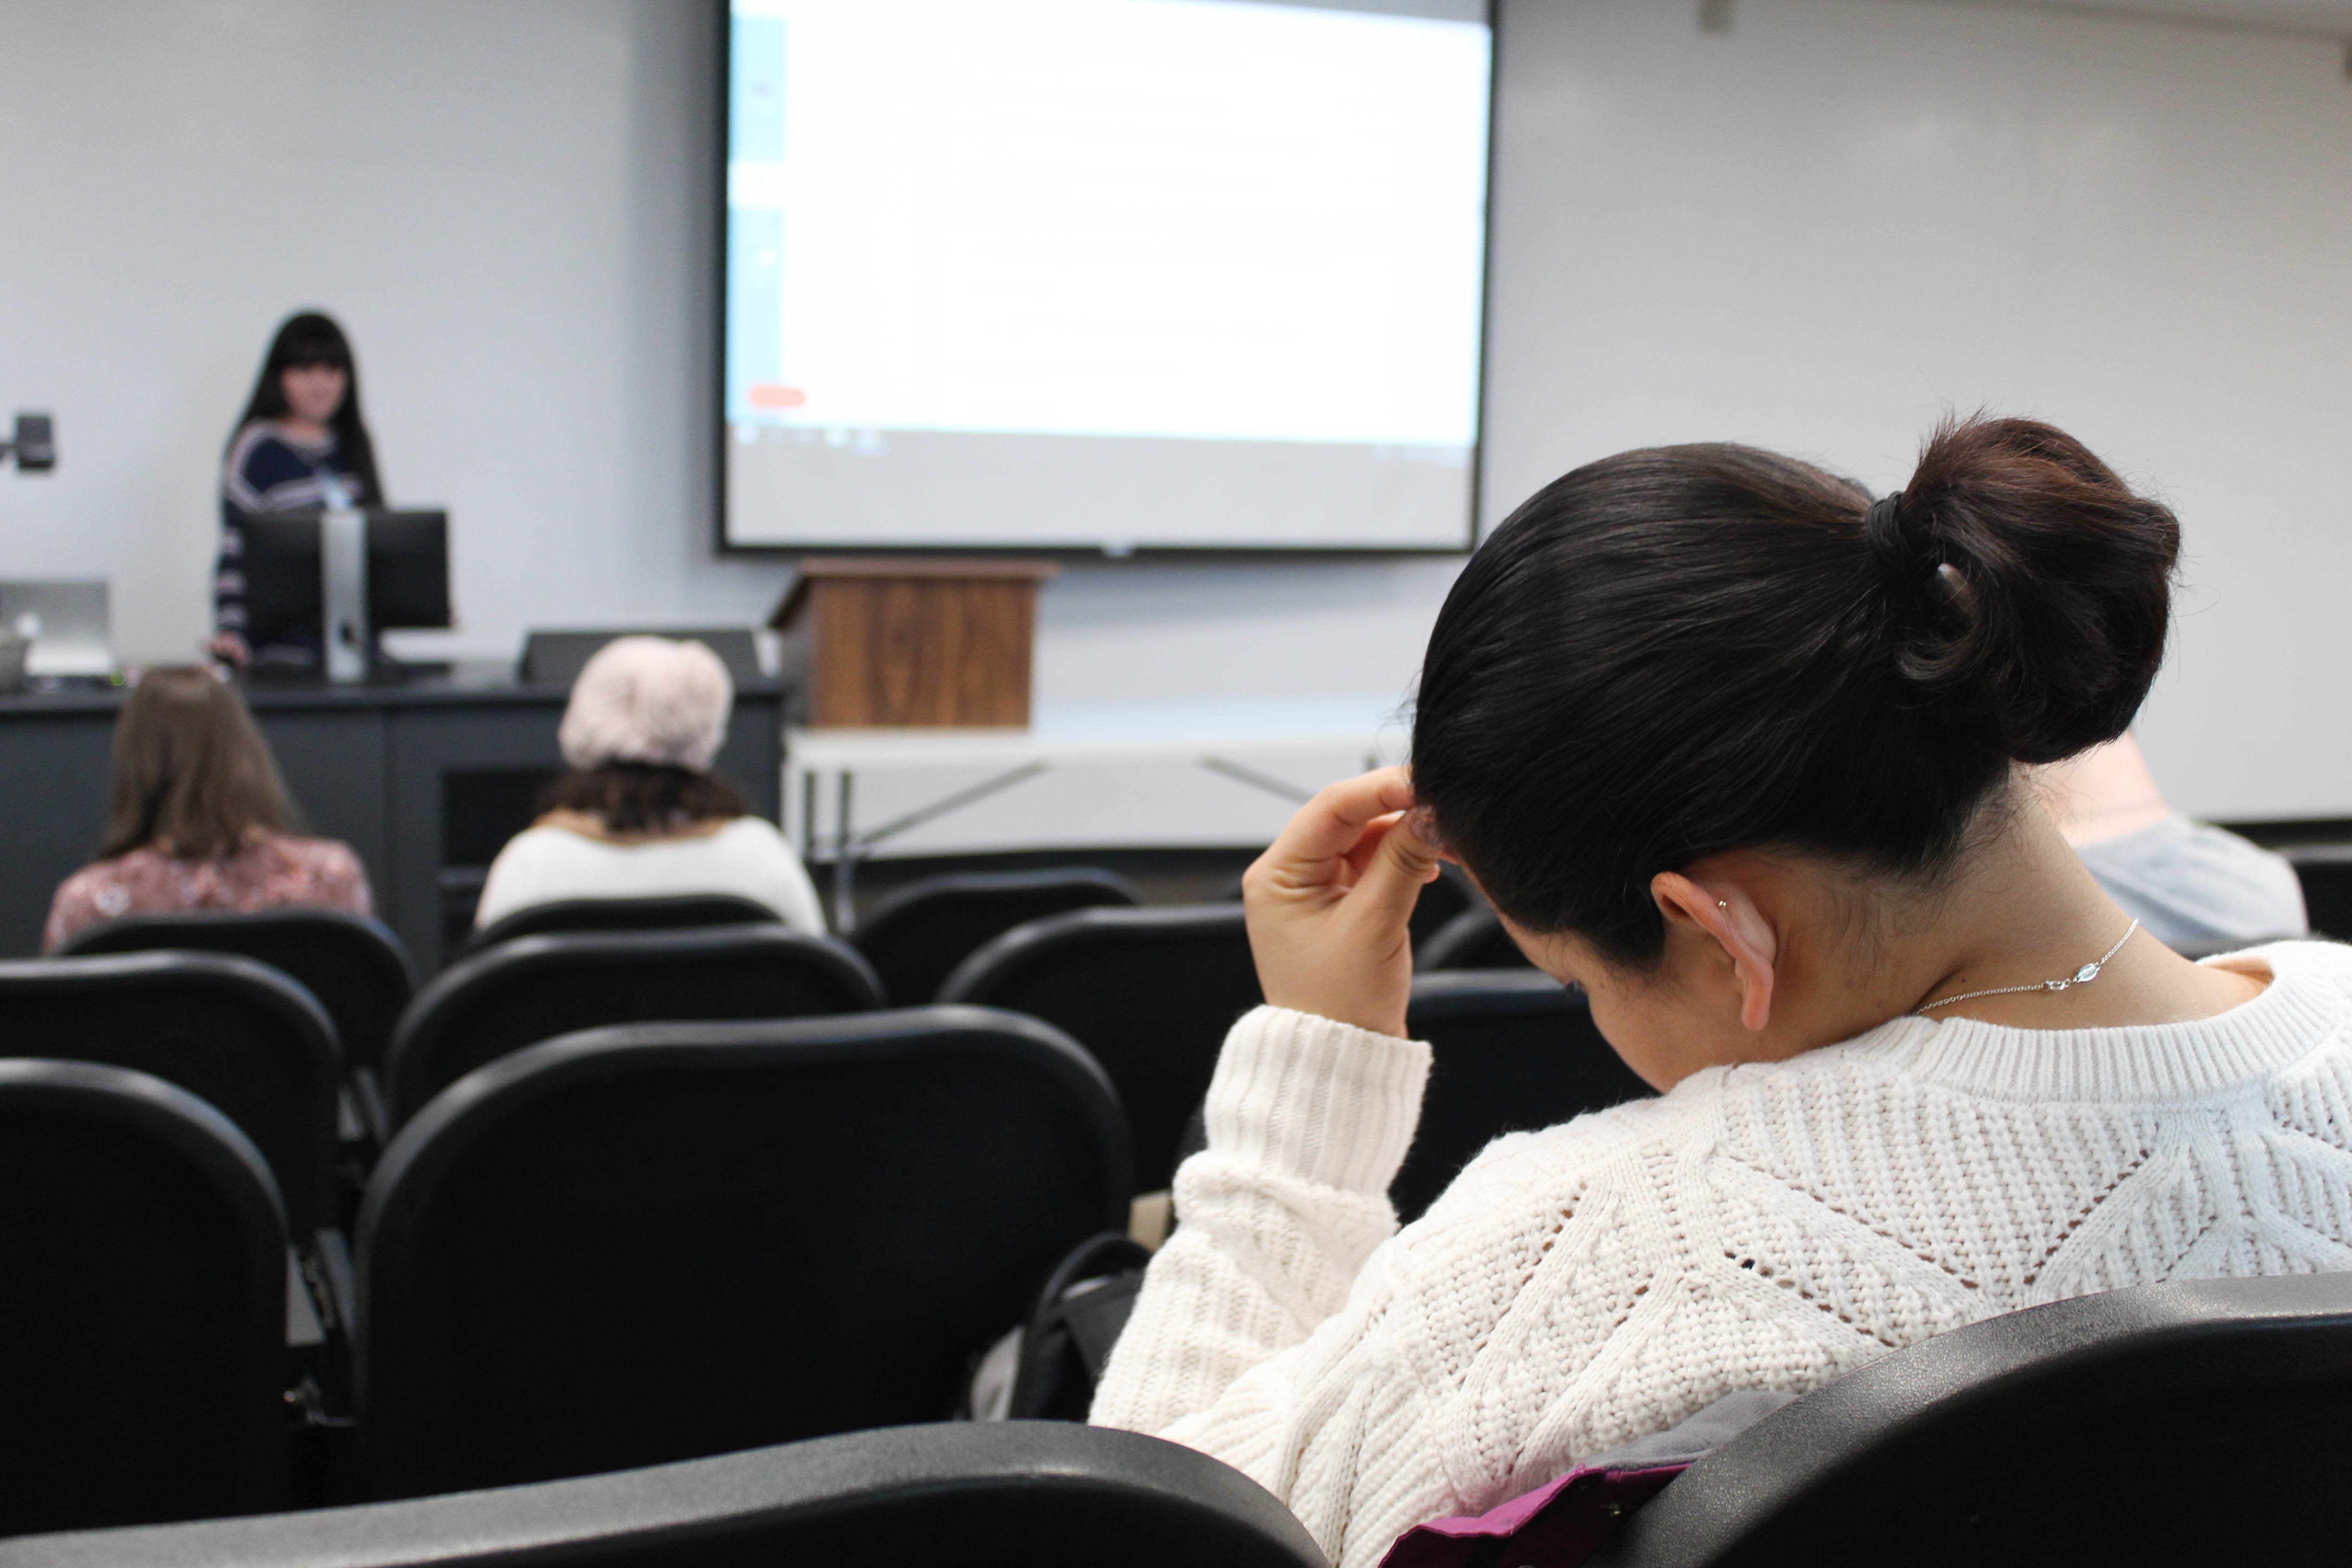 OPINION: Professors must allow students to form personal opinions